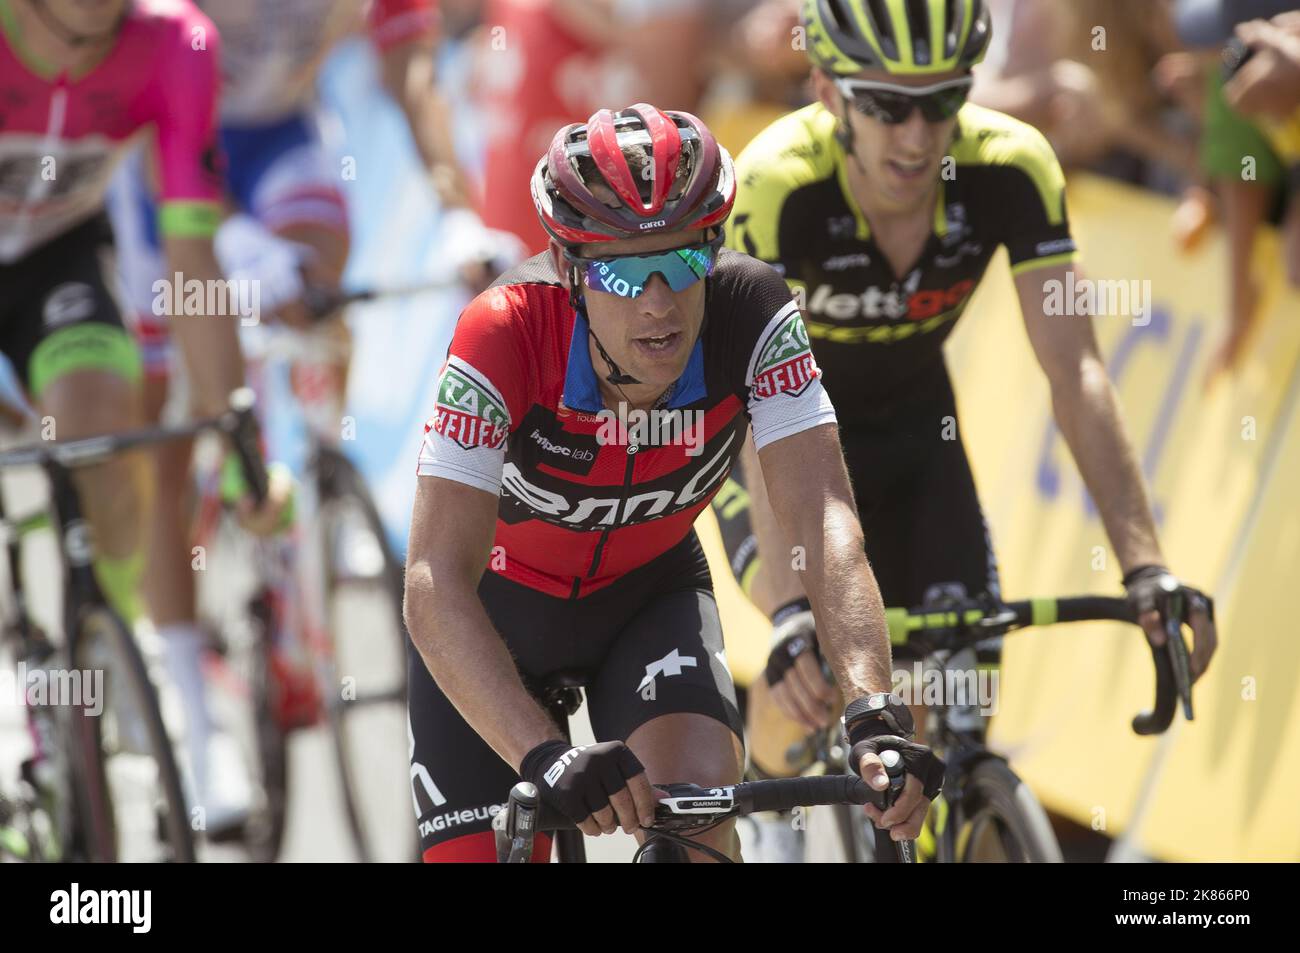 Finish line - Australia's Richie Porte for team BMC racing at the front with GB's Adam Yates for Michelton Scott behind him during the Tour de France 2018 Stage 1 from Noirmoutier en L'Ille to Fontenay Le Comte.  Stock Photo